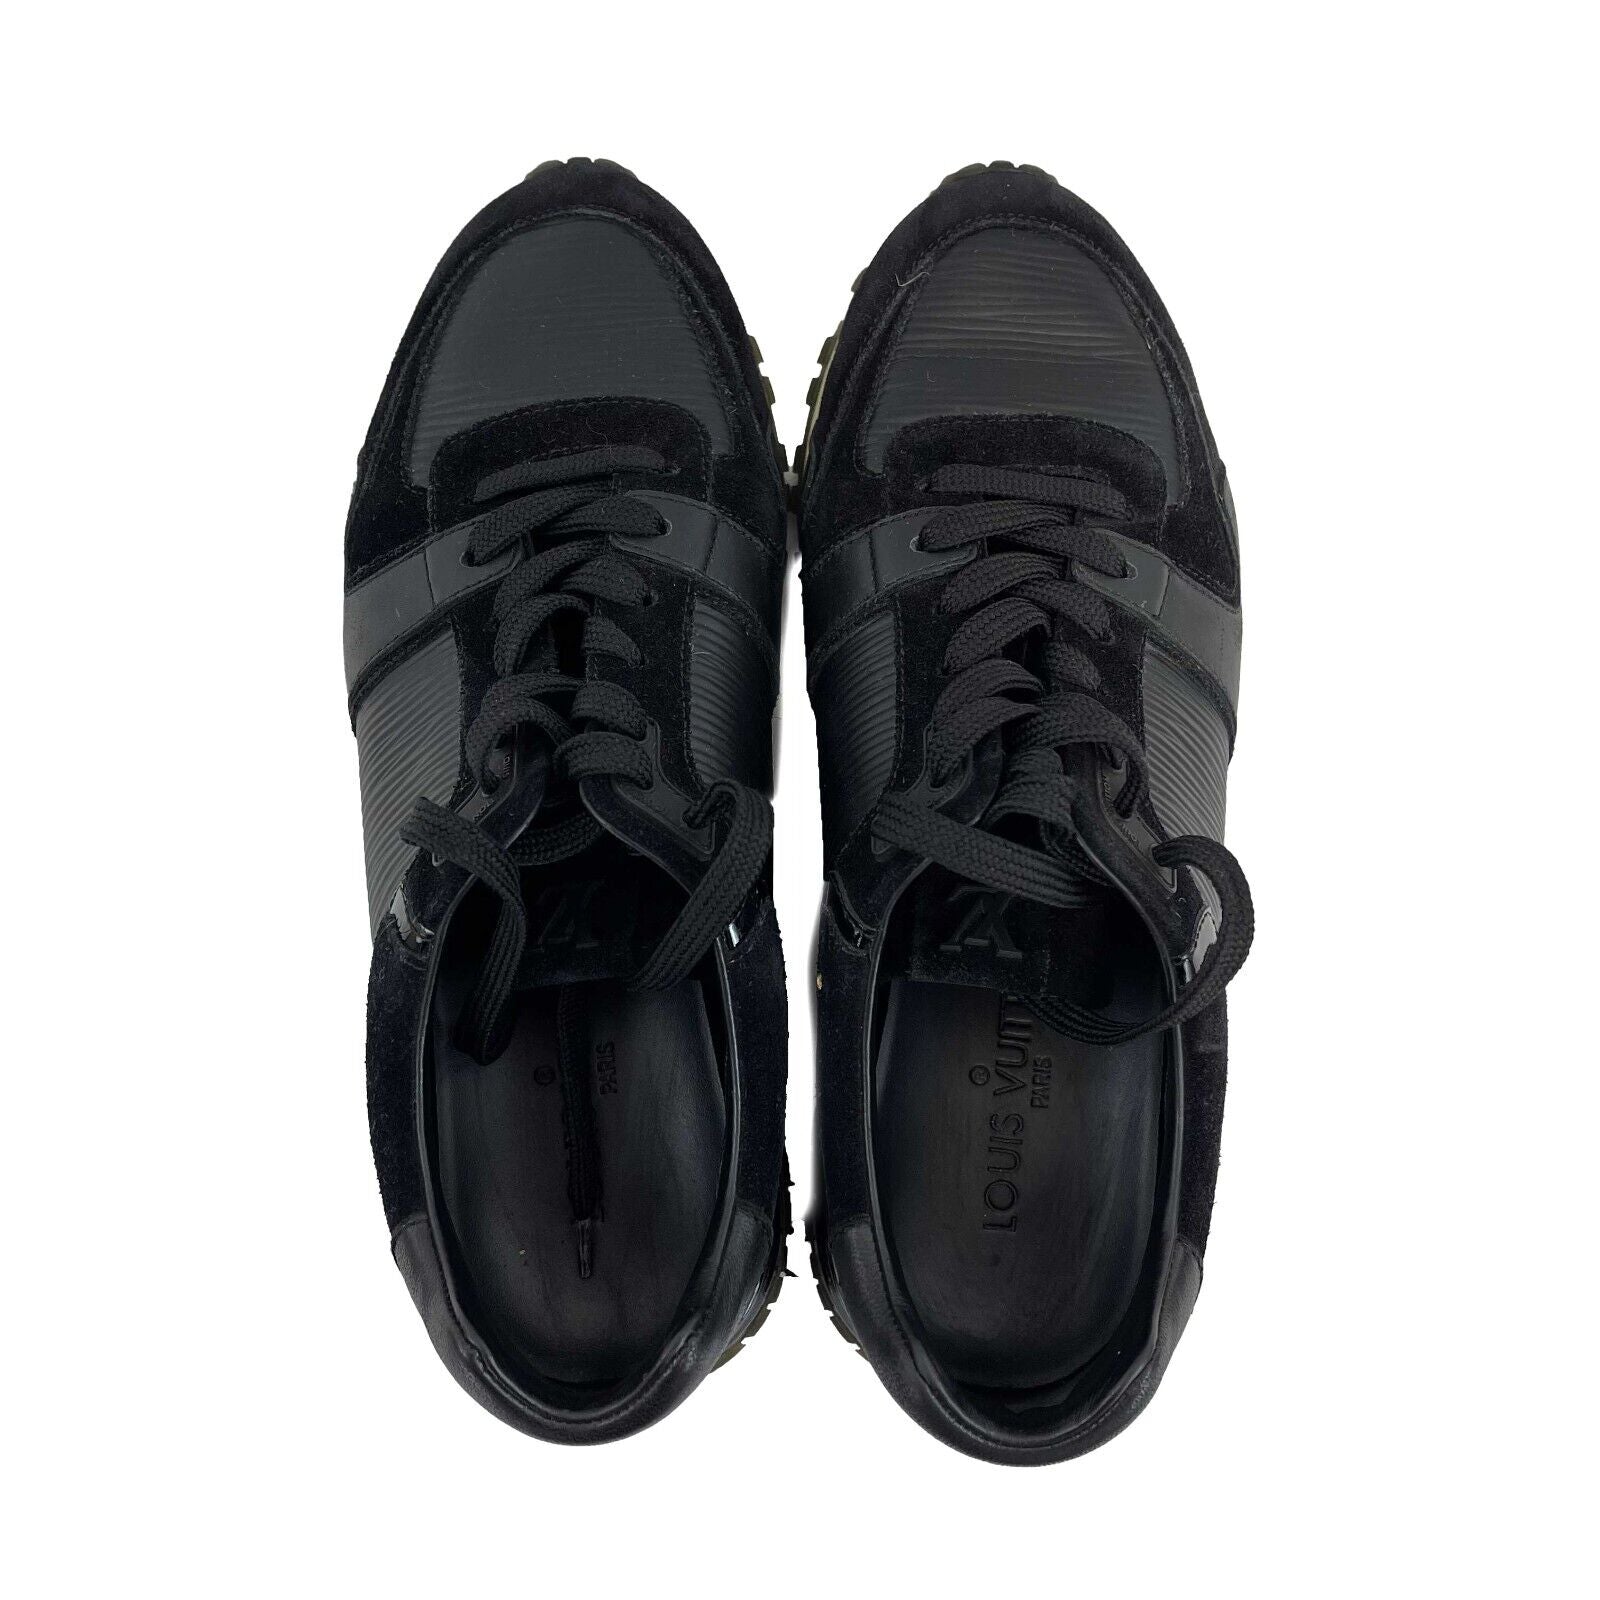 Run away leather trainers Louis Vuitton Black size 37 EU in Leather -  35212278